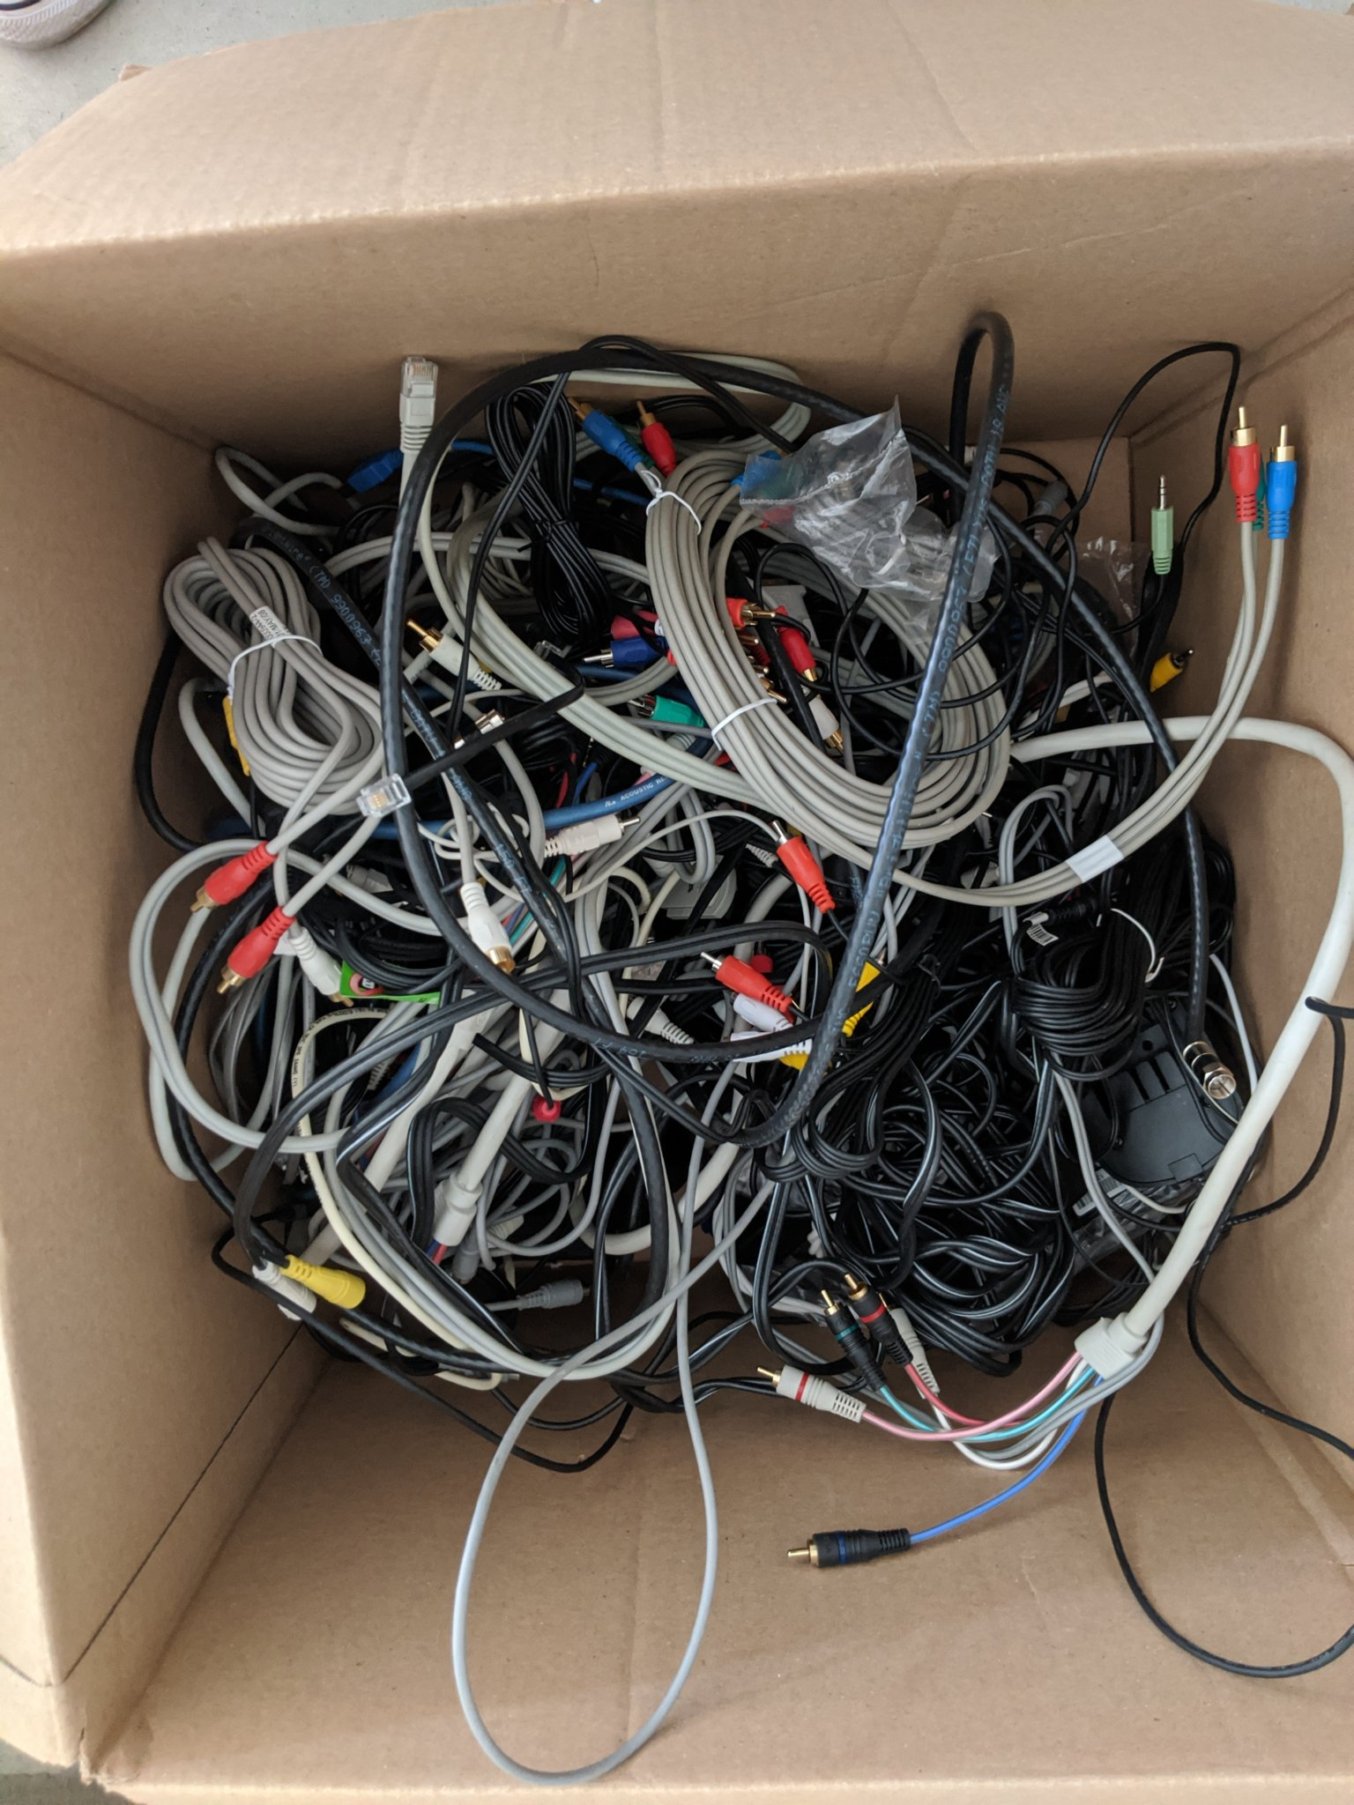 Electronics Recycling During COVID